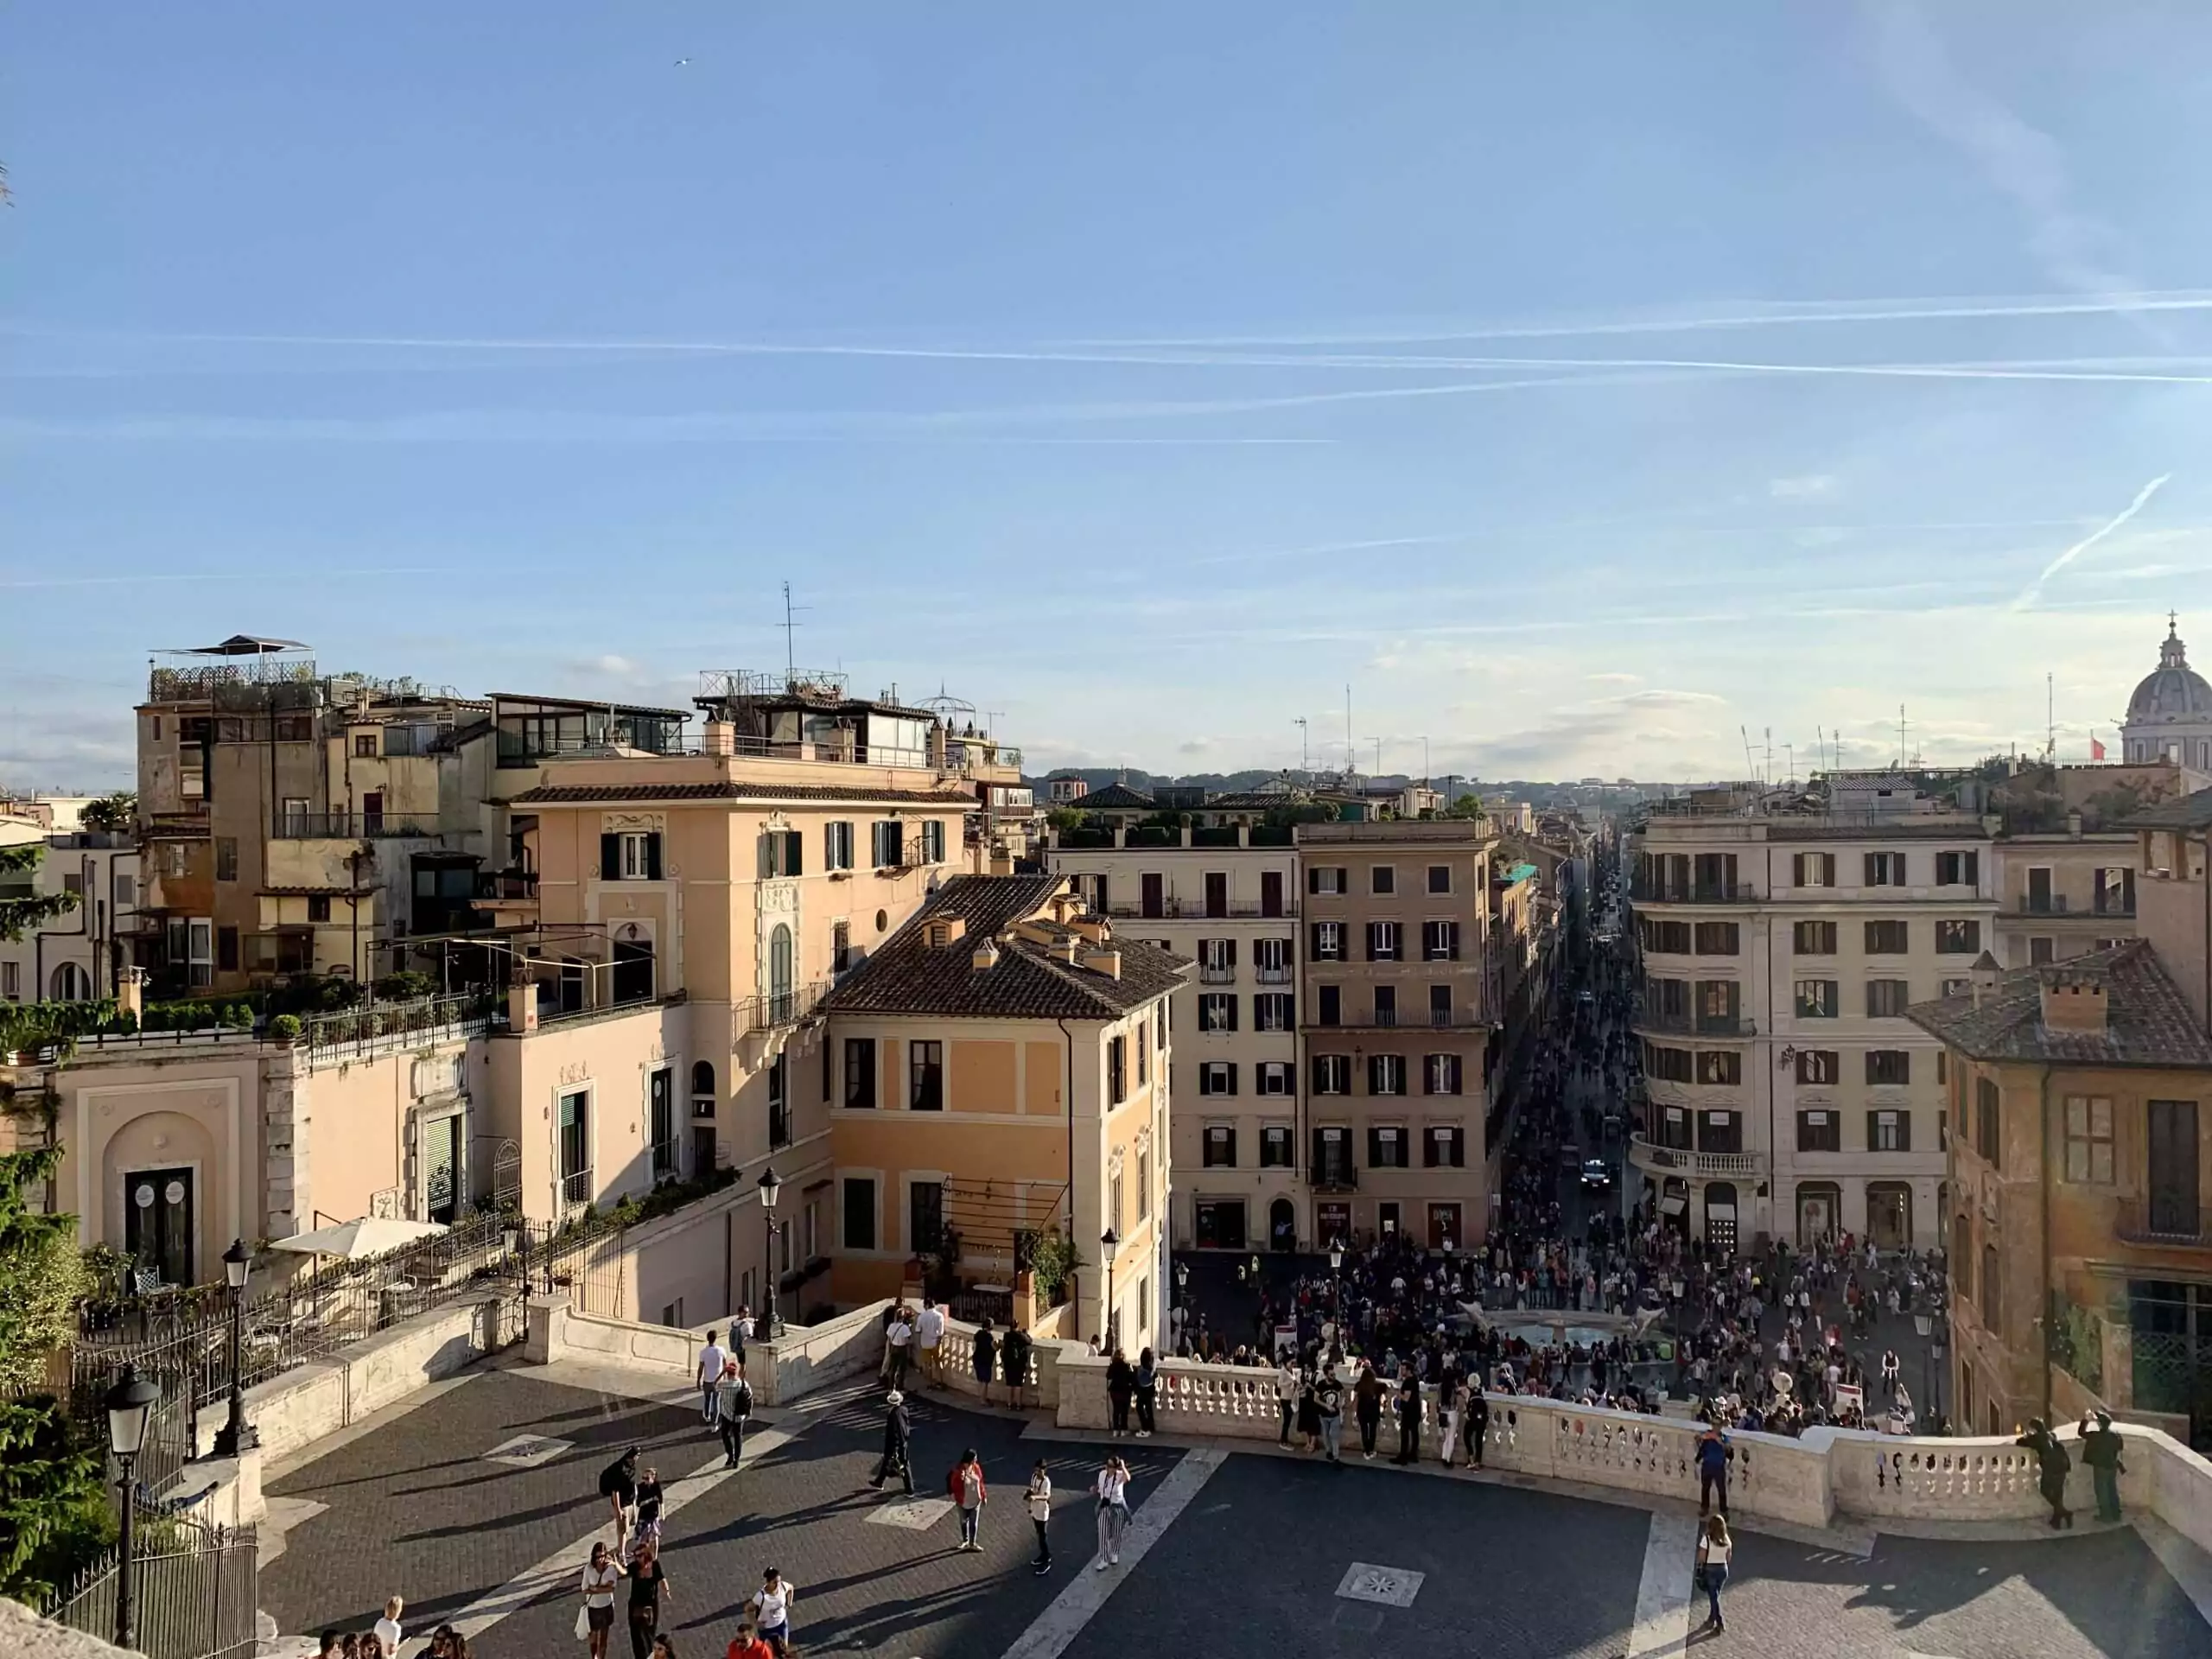 Spanish Steps from the top